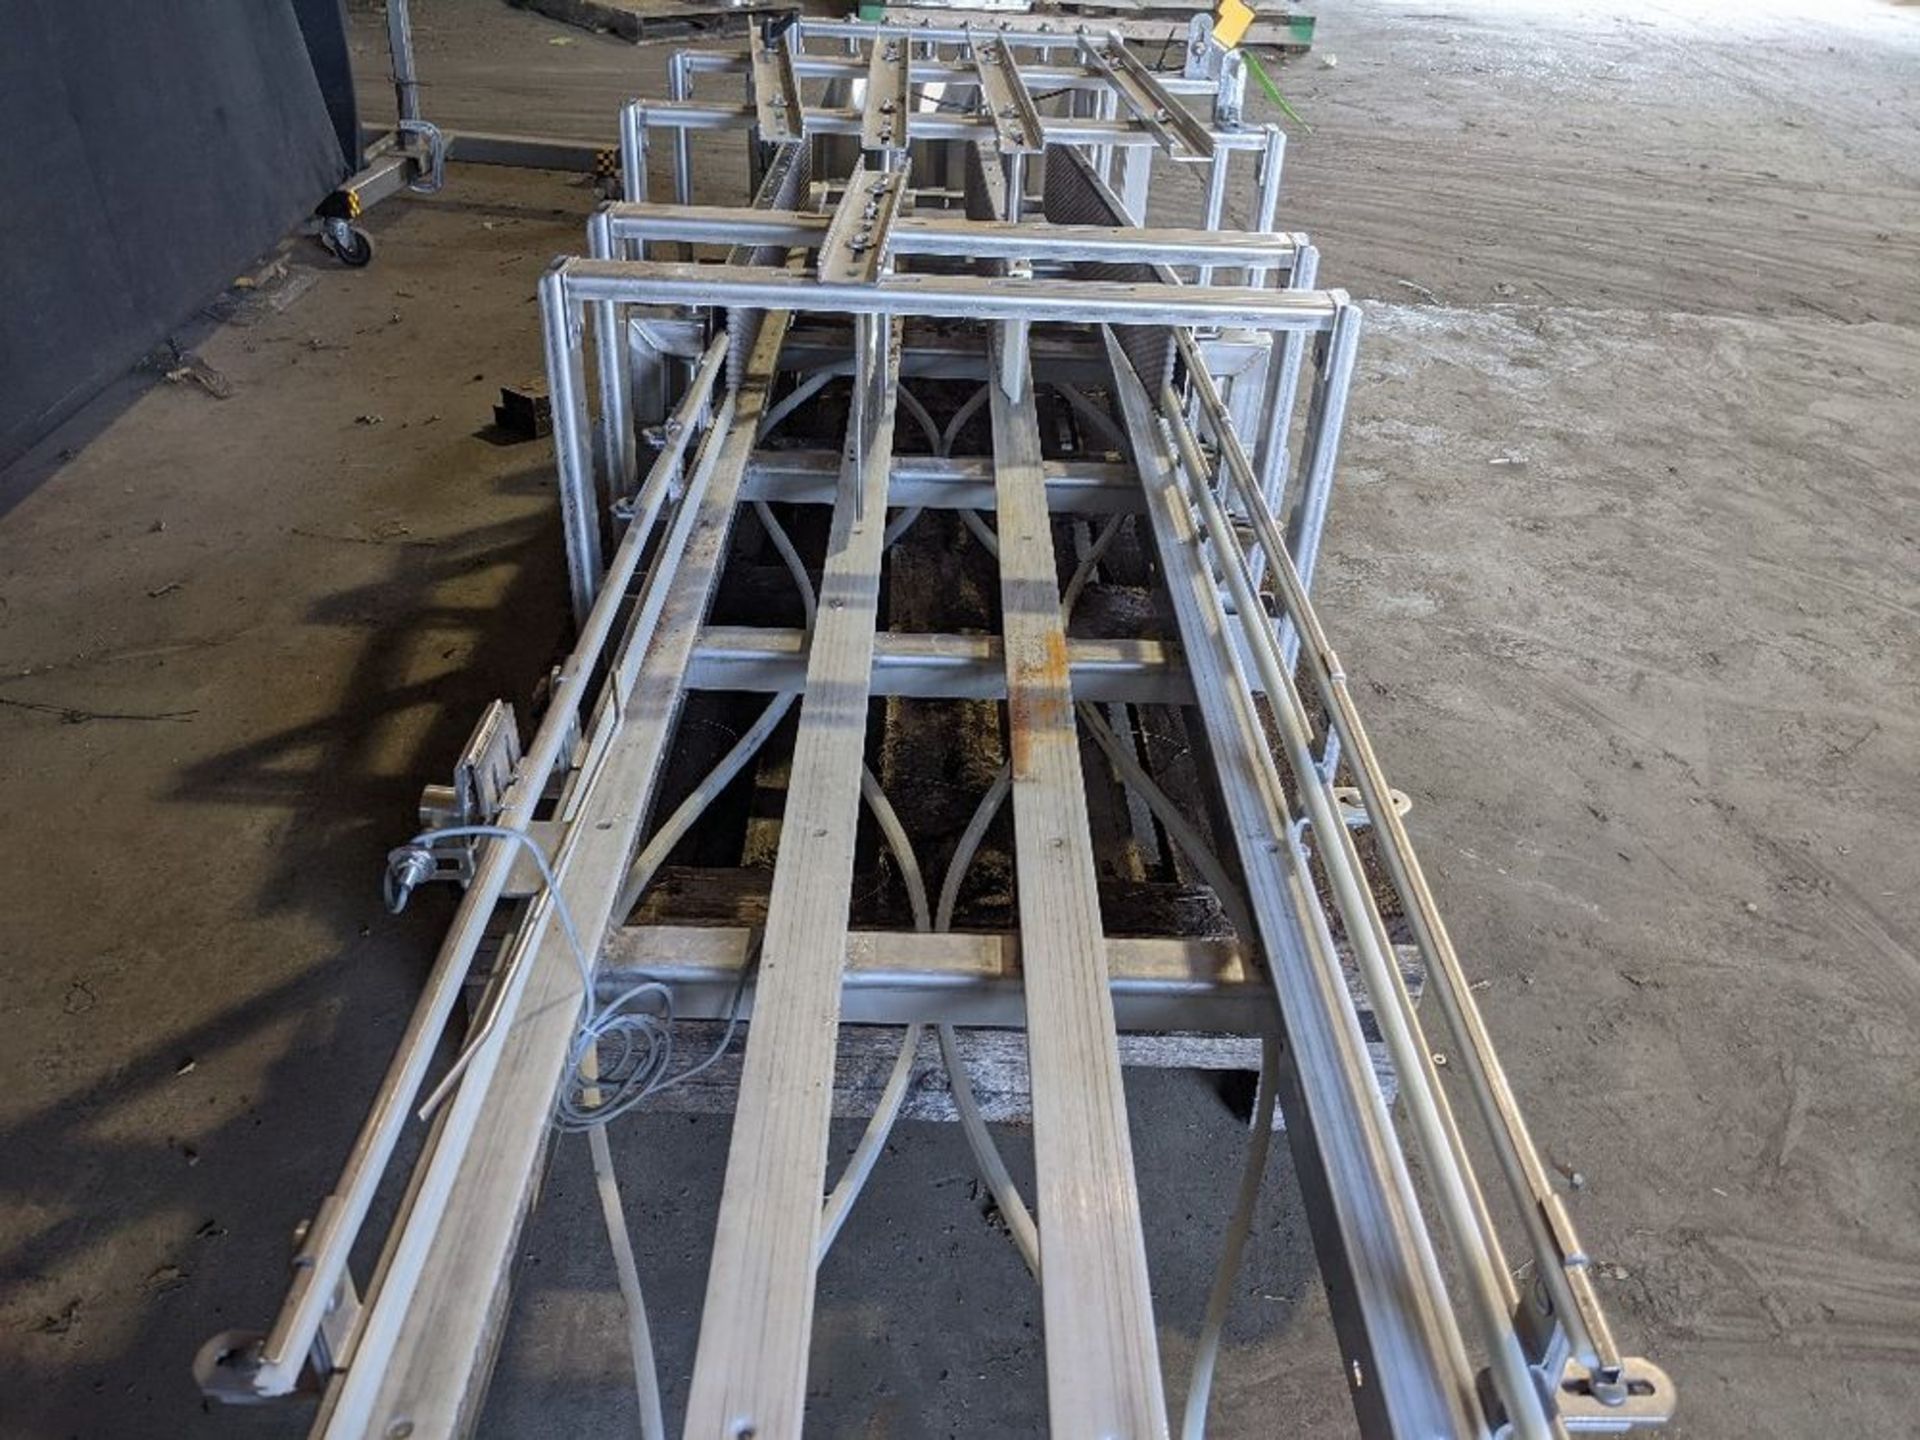 Qty (1) 24" Wide Sentry Matt Top Conveyor - All Stainless Steel Construction - Overhead Lanes - Image 3 of 6